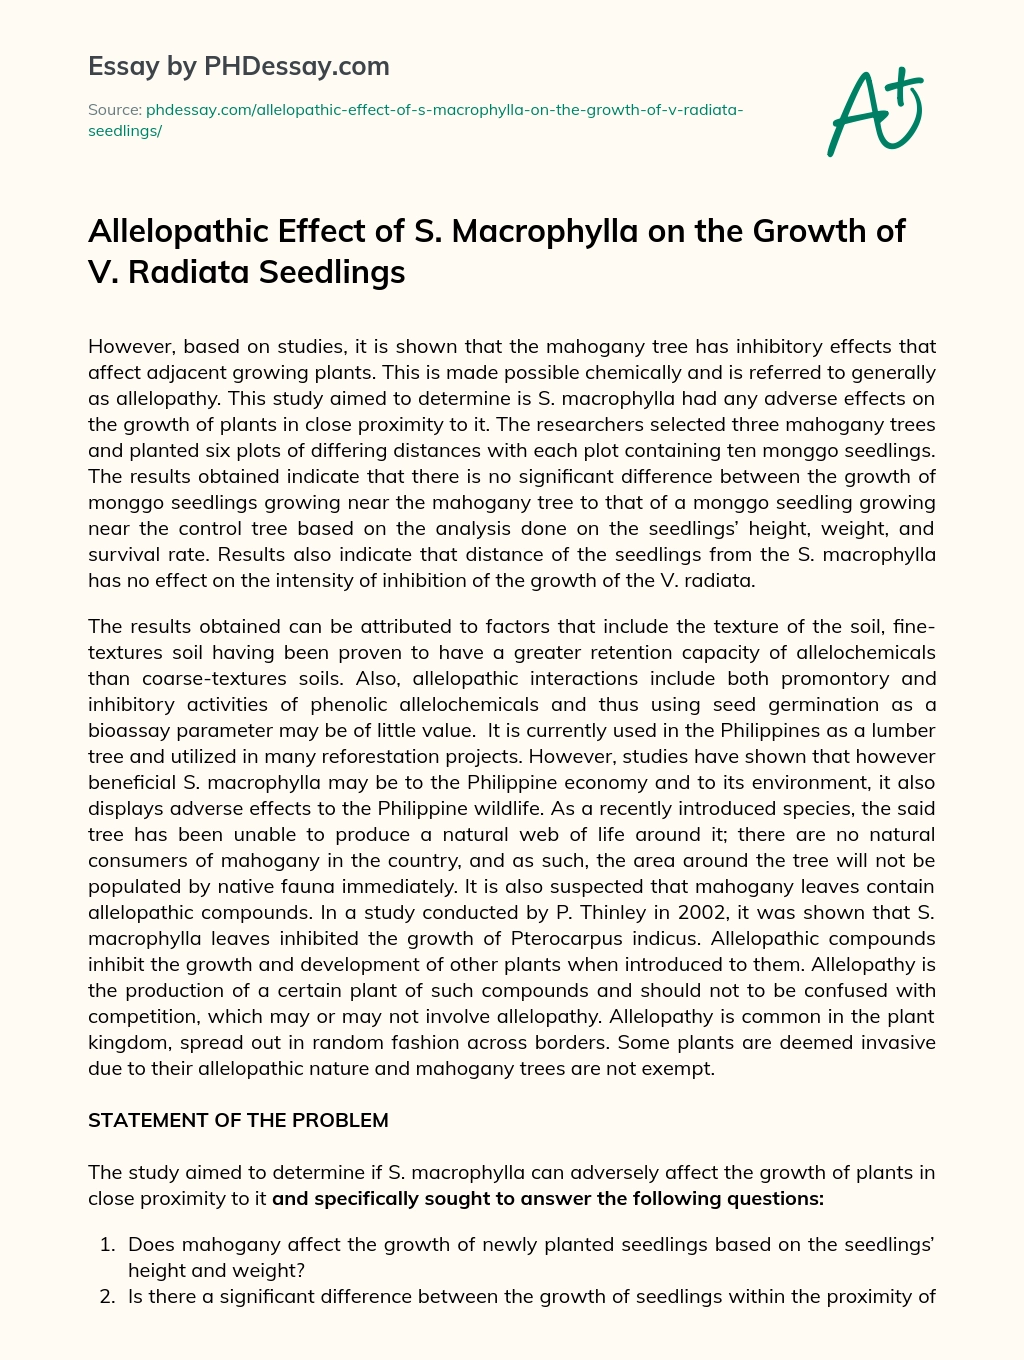 Allelopathic Effect of S. Macrophylla on the Growth of V. Radiata Seedlings essay